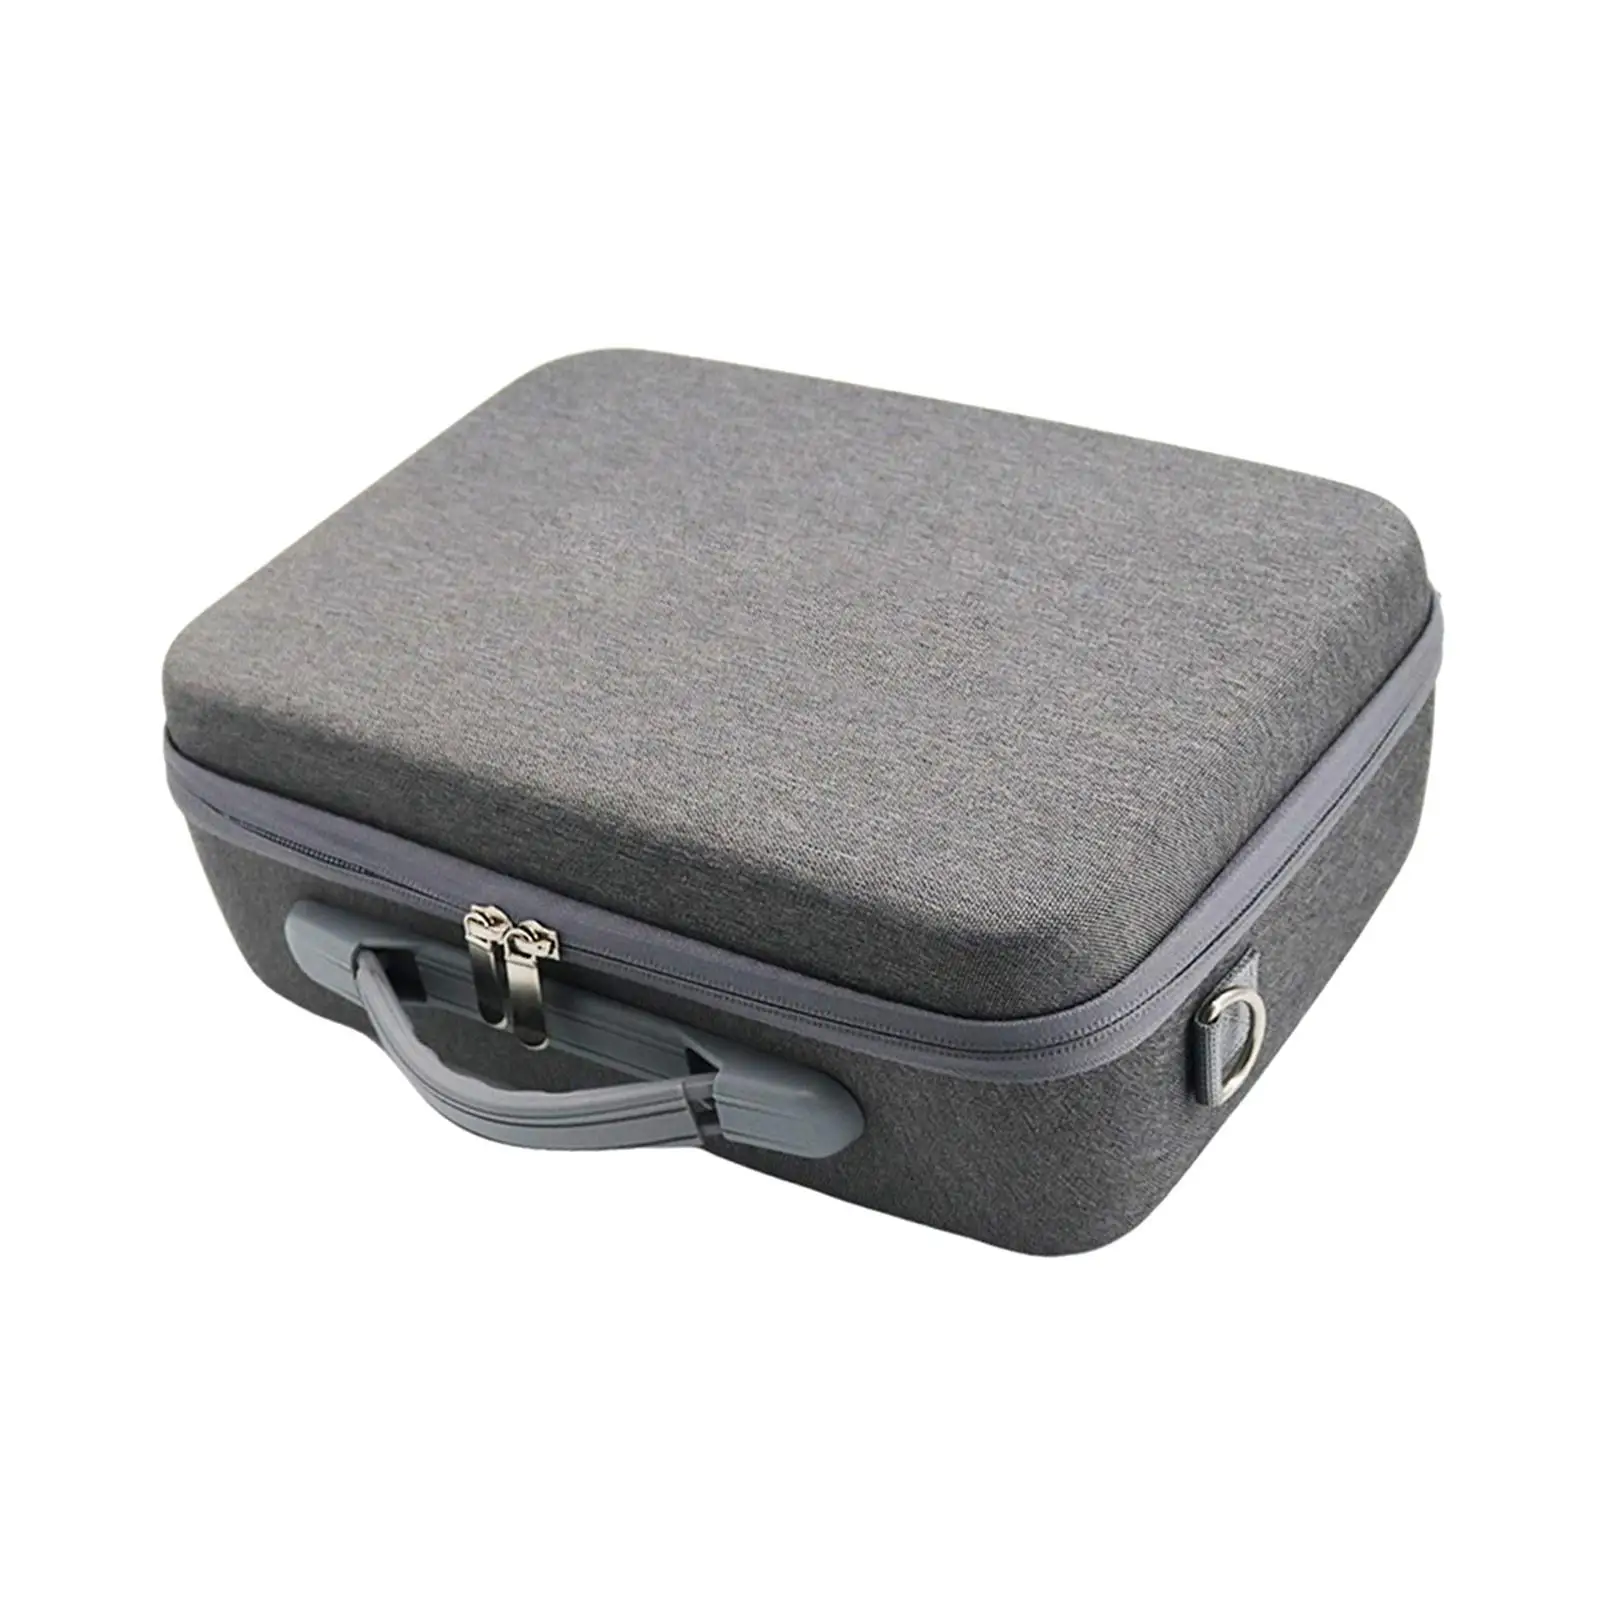 Travel Carrying Case Pressure Resistance Travel Case Durable Large Capacity Hard Case Storage Shoulder Bag for Drone Accessories